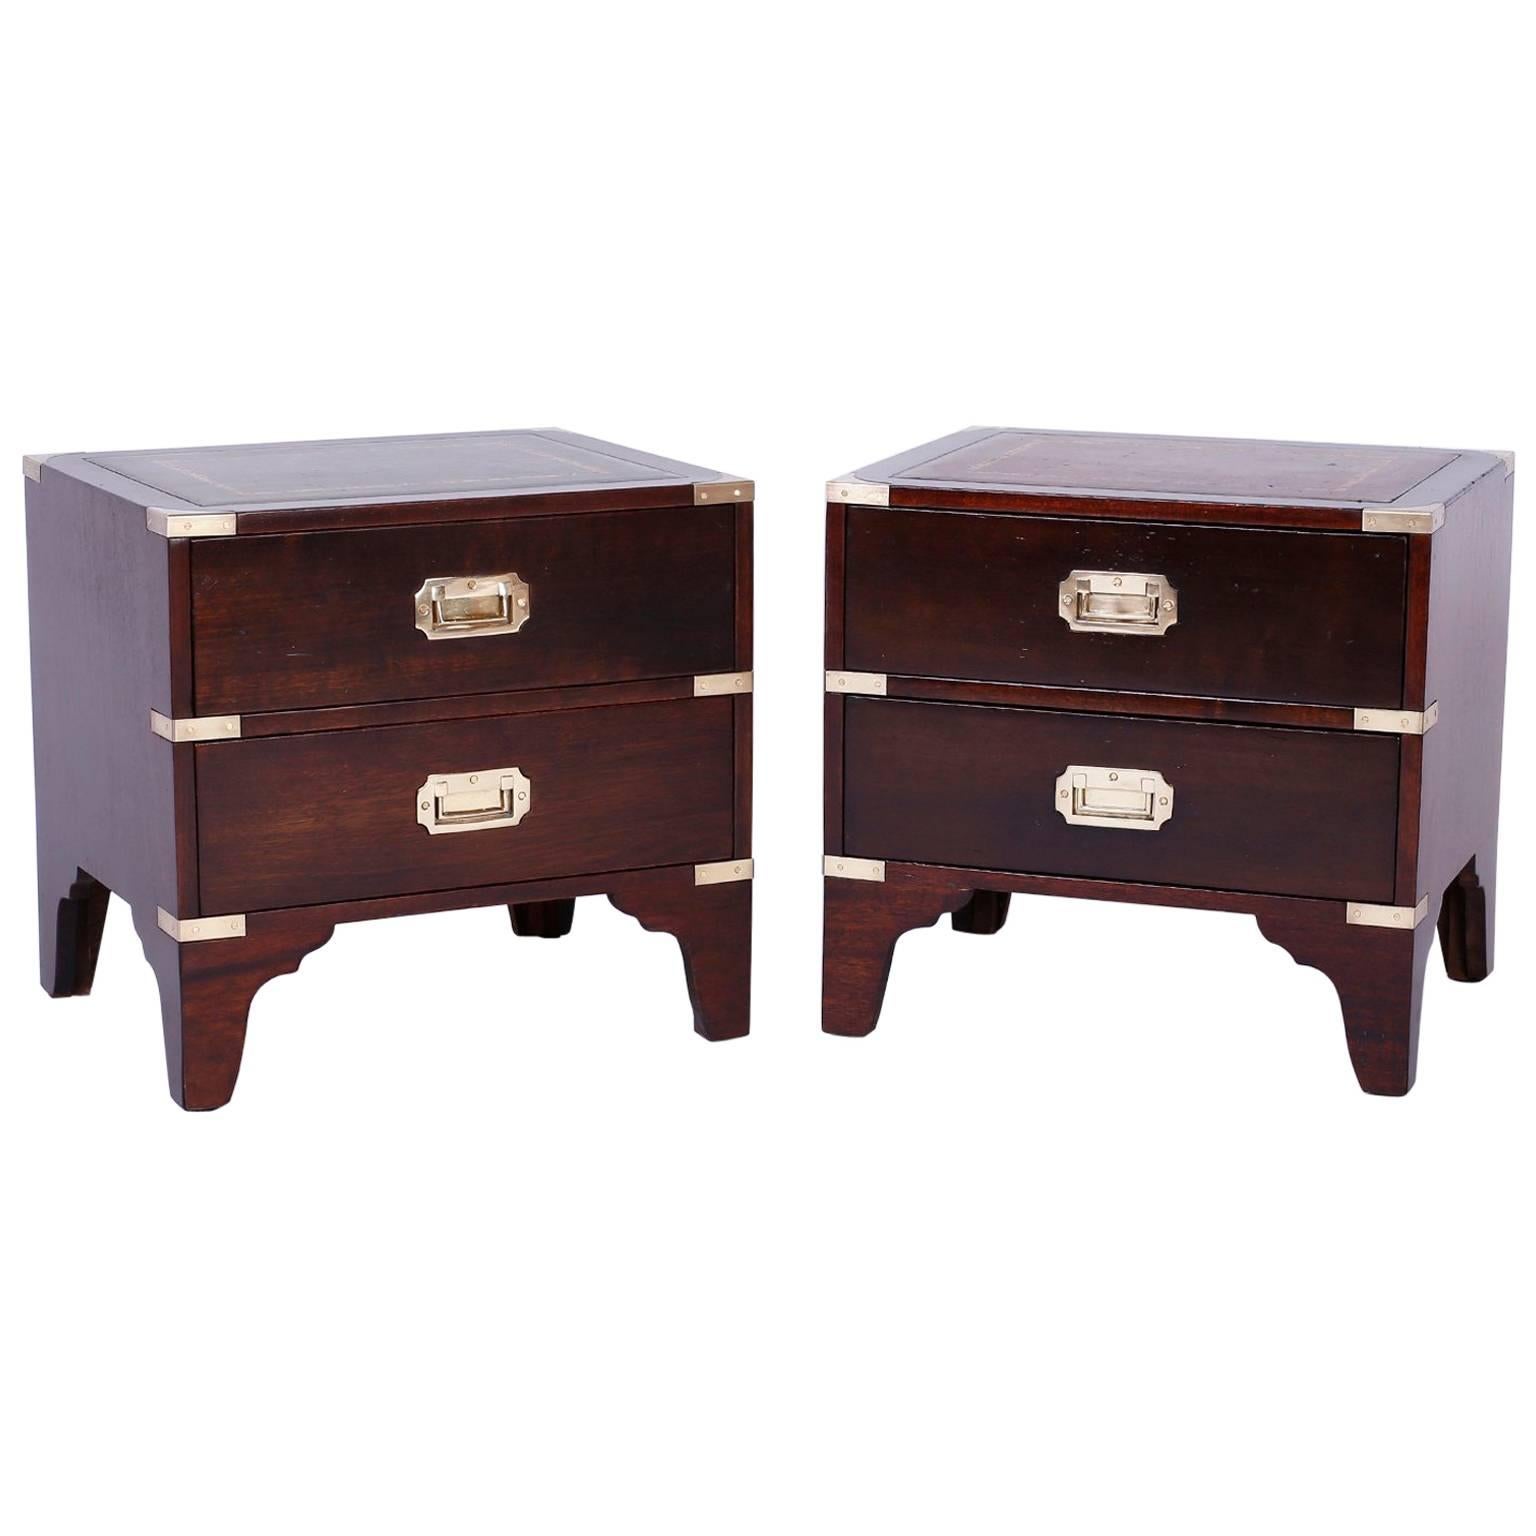 Pair of Low Campaign Nightstands